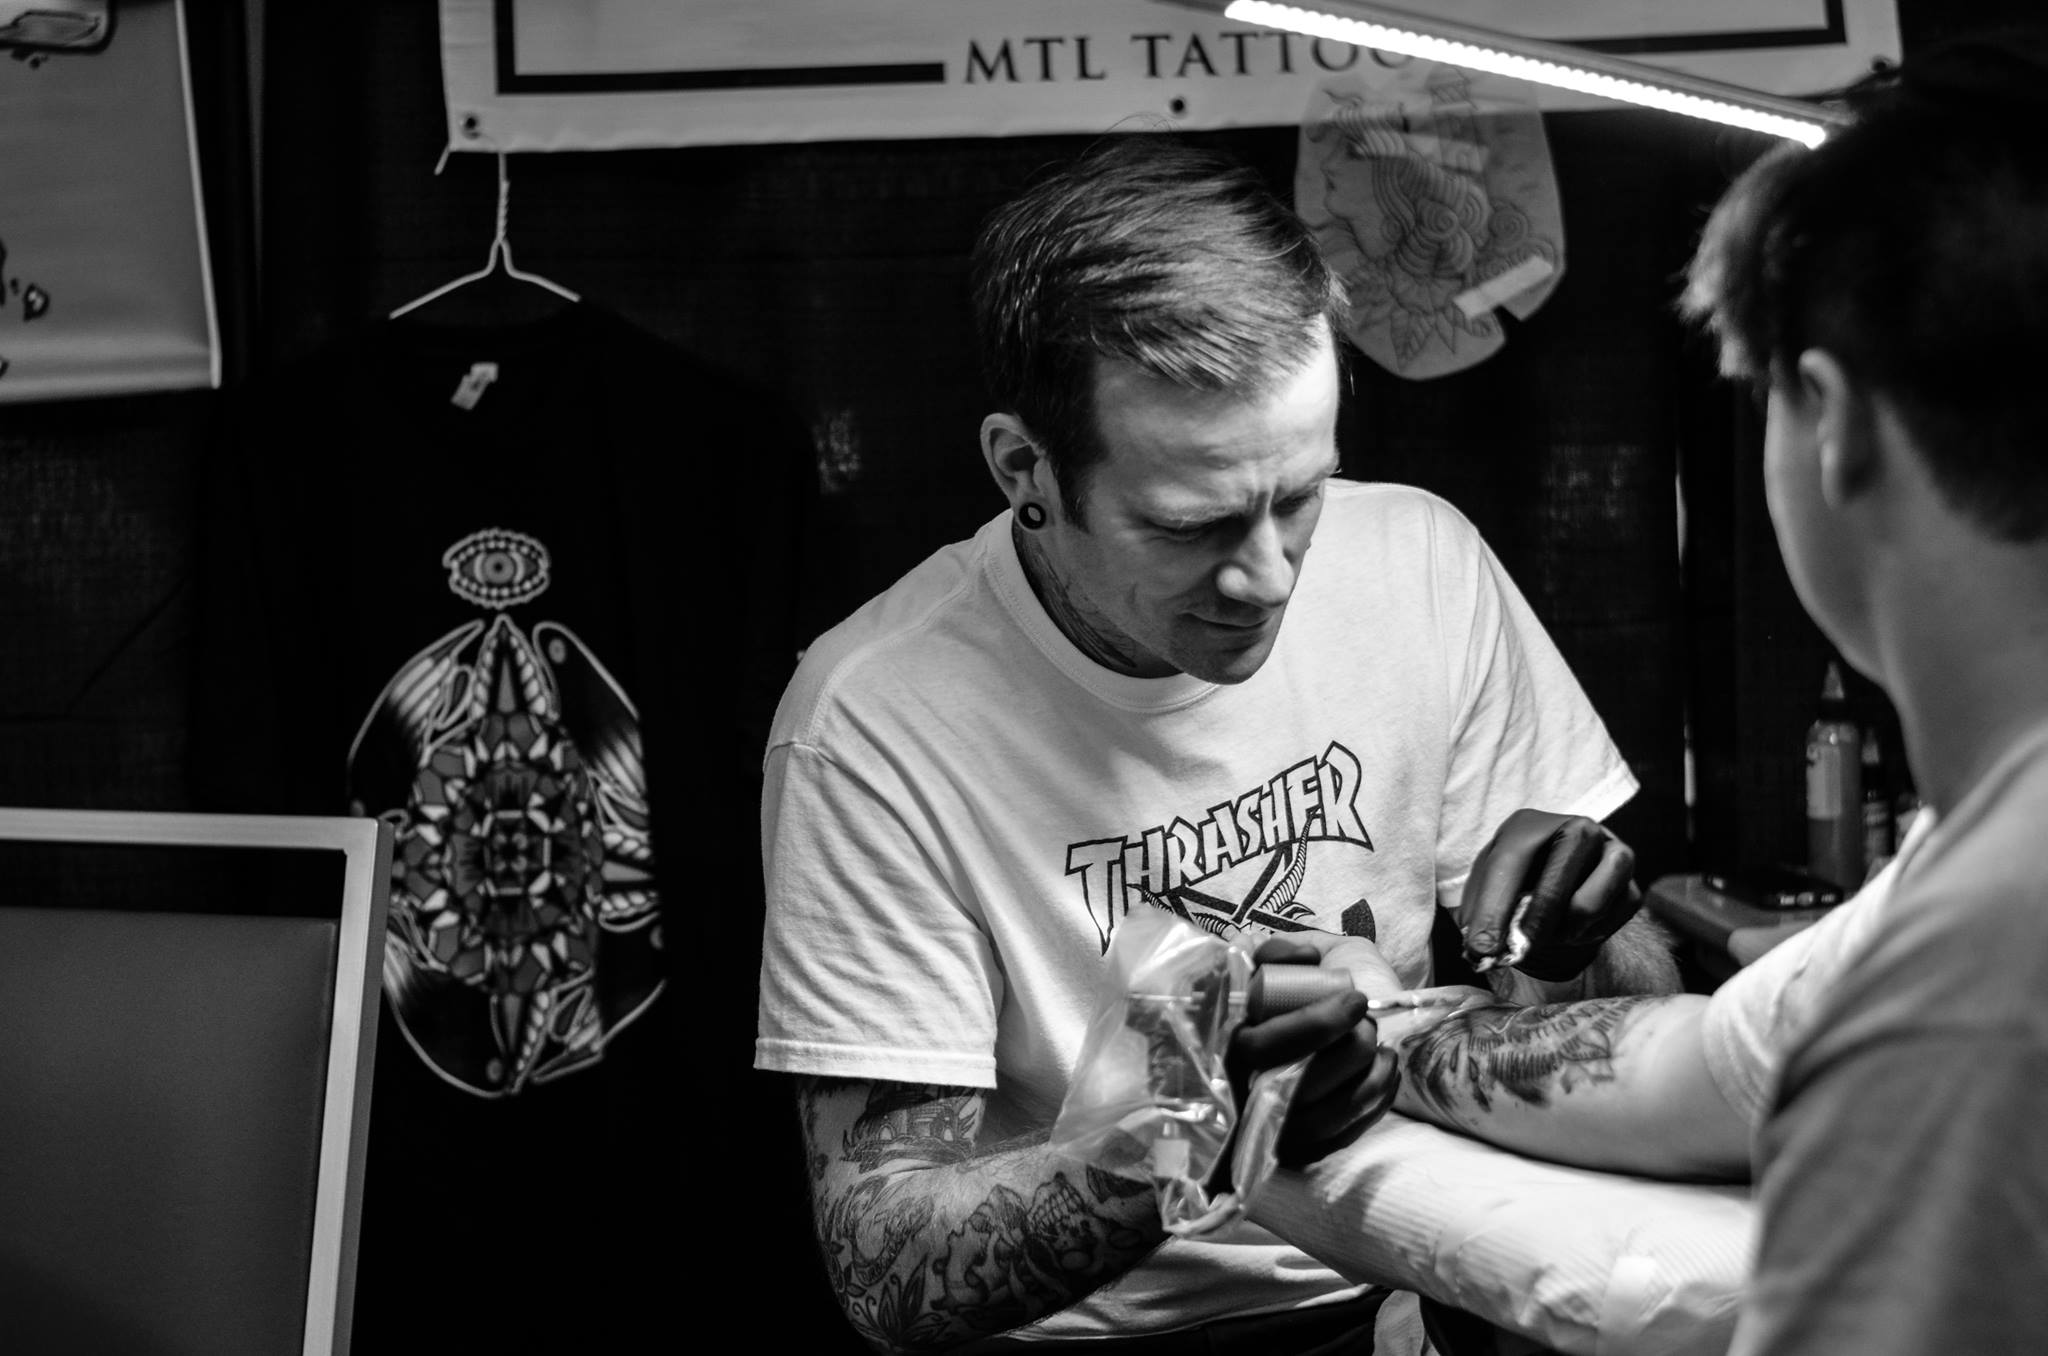 Celebrating the Art - and Fun - of the Tattoo World